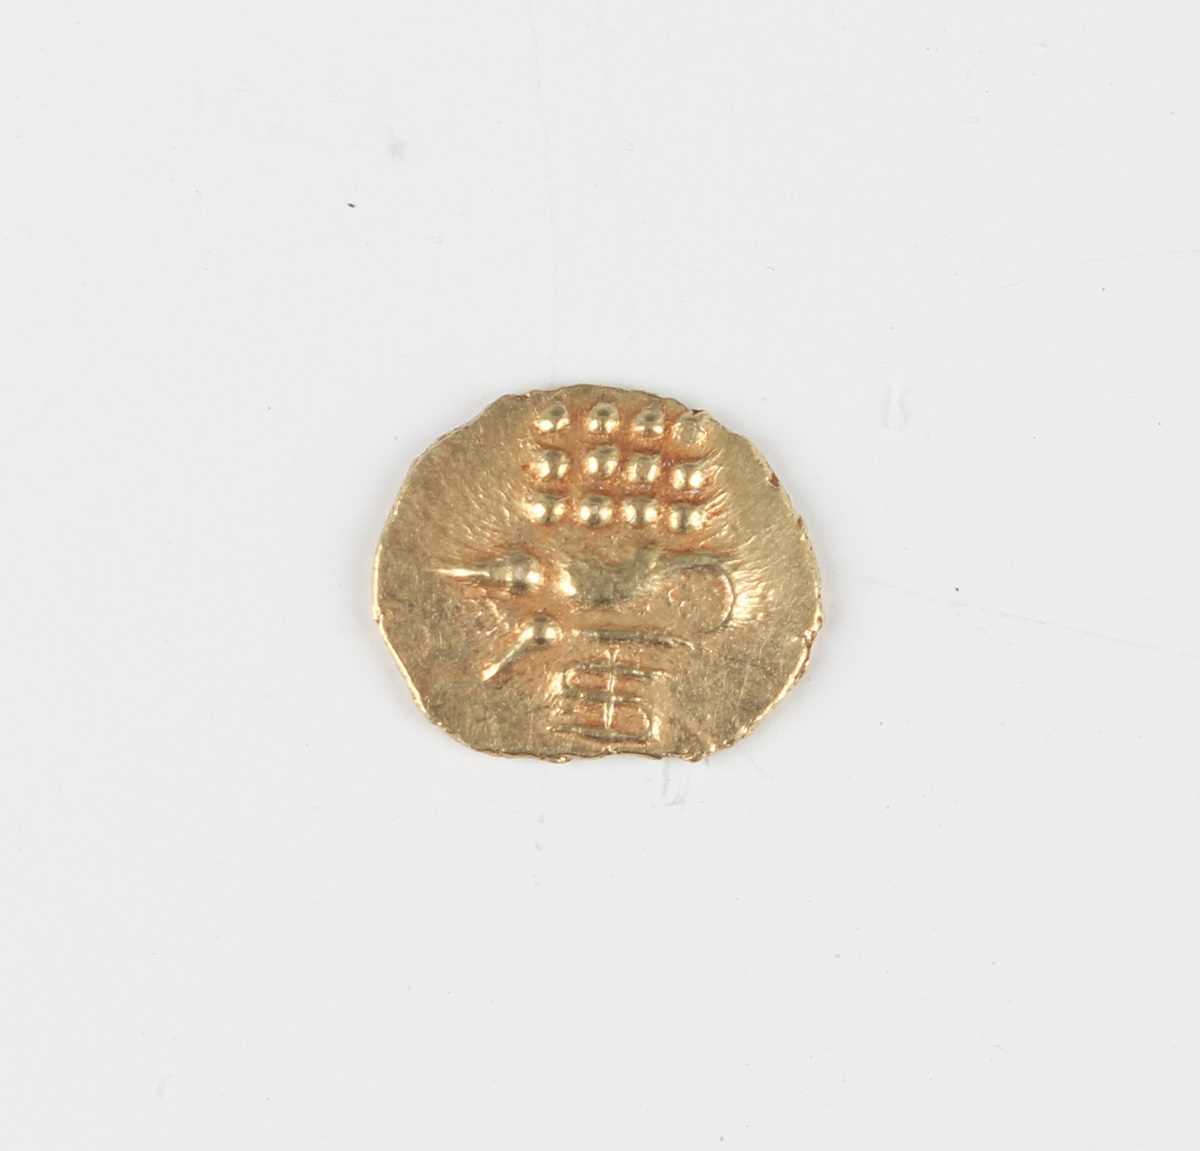 An India gold fanam, probably 18th century, together with a group of European and world coinage, - Image 5 of 5